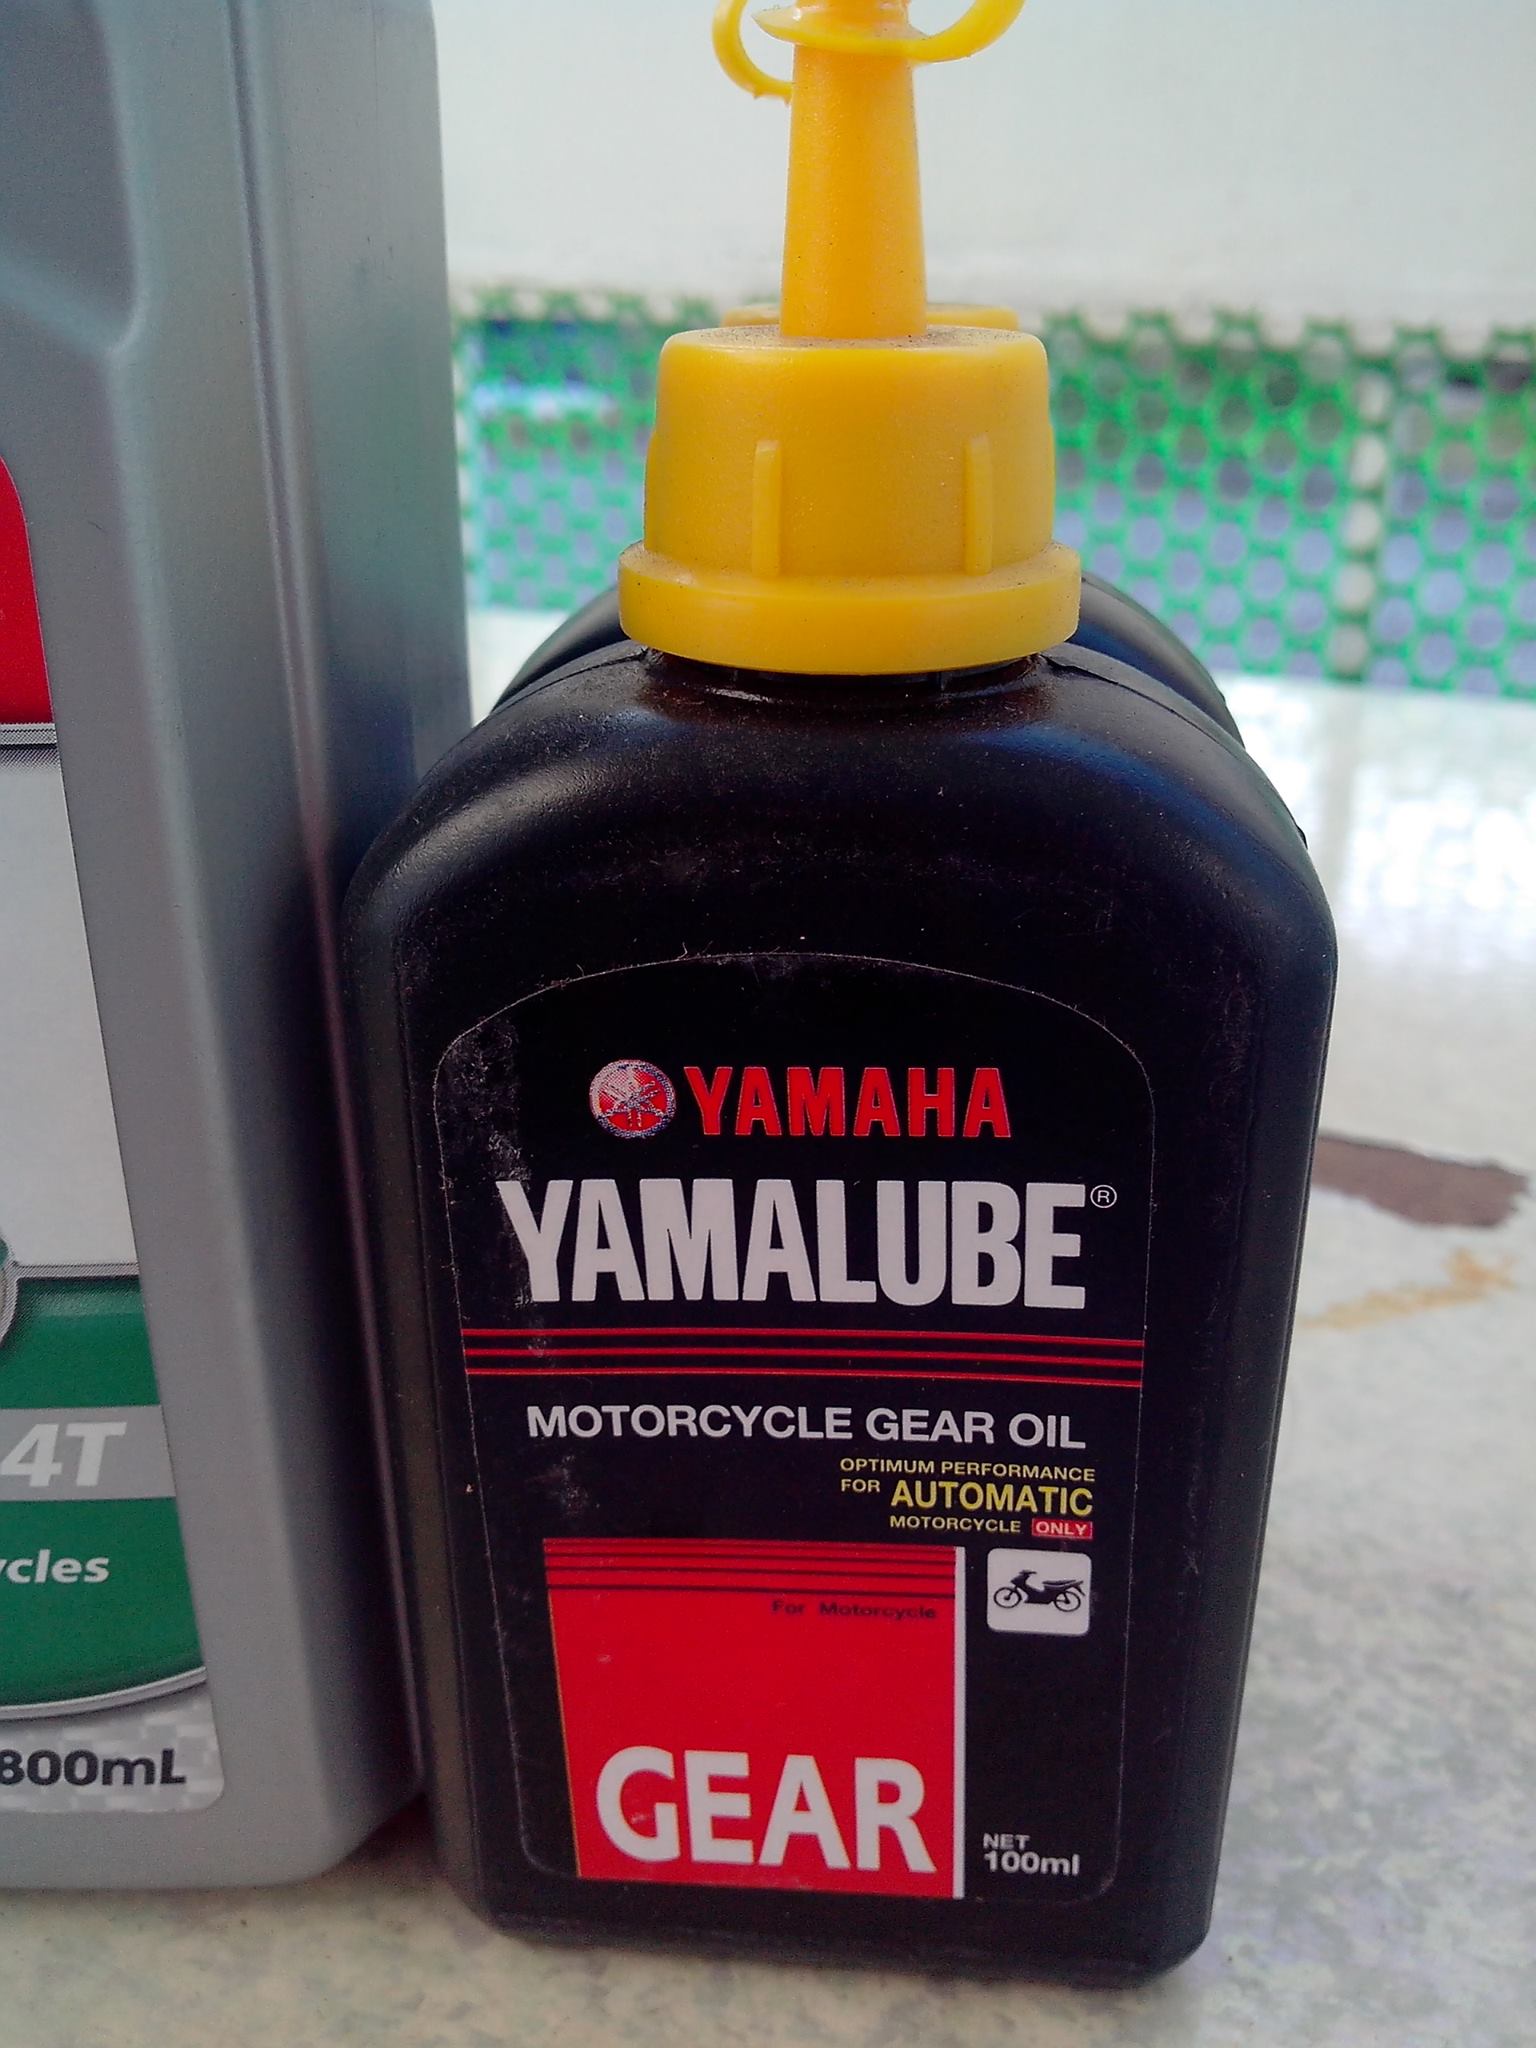 How is gearbox oil different from regular engine oil?